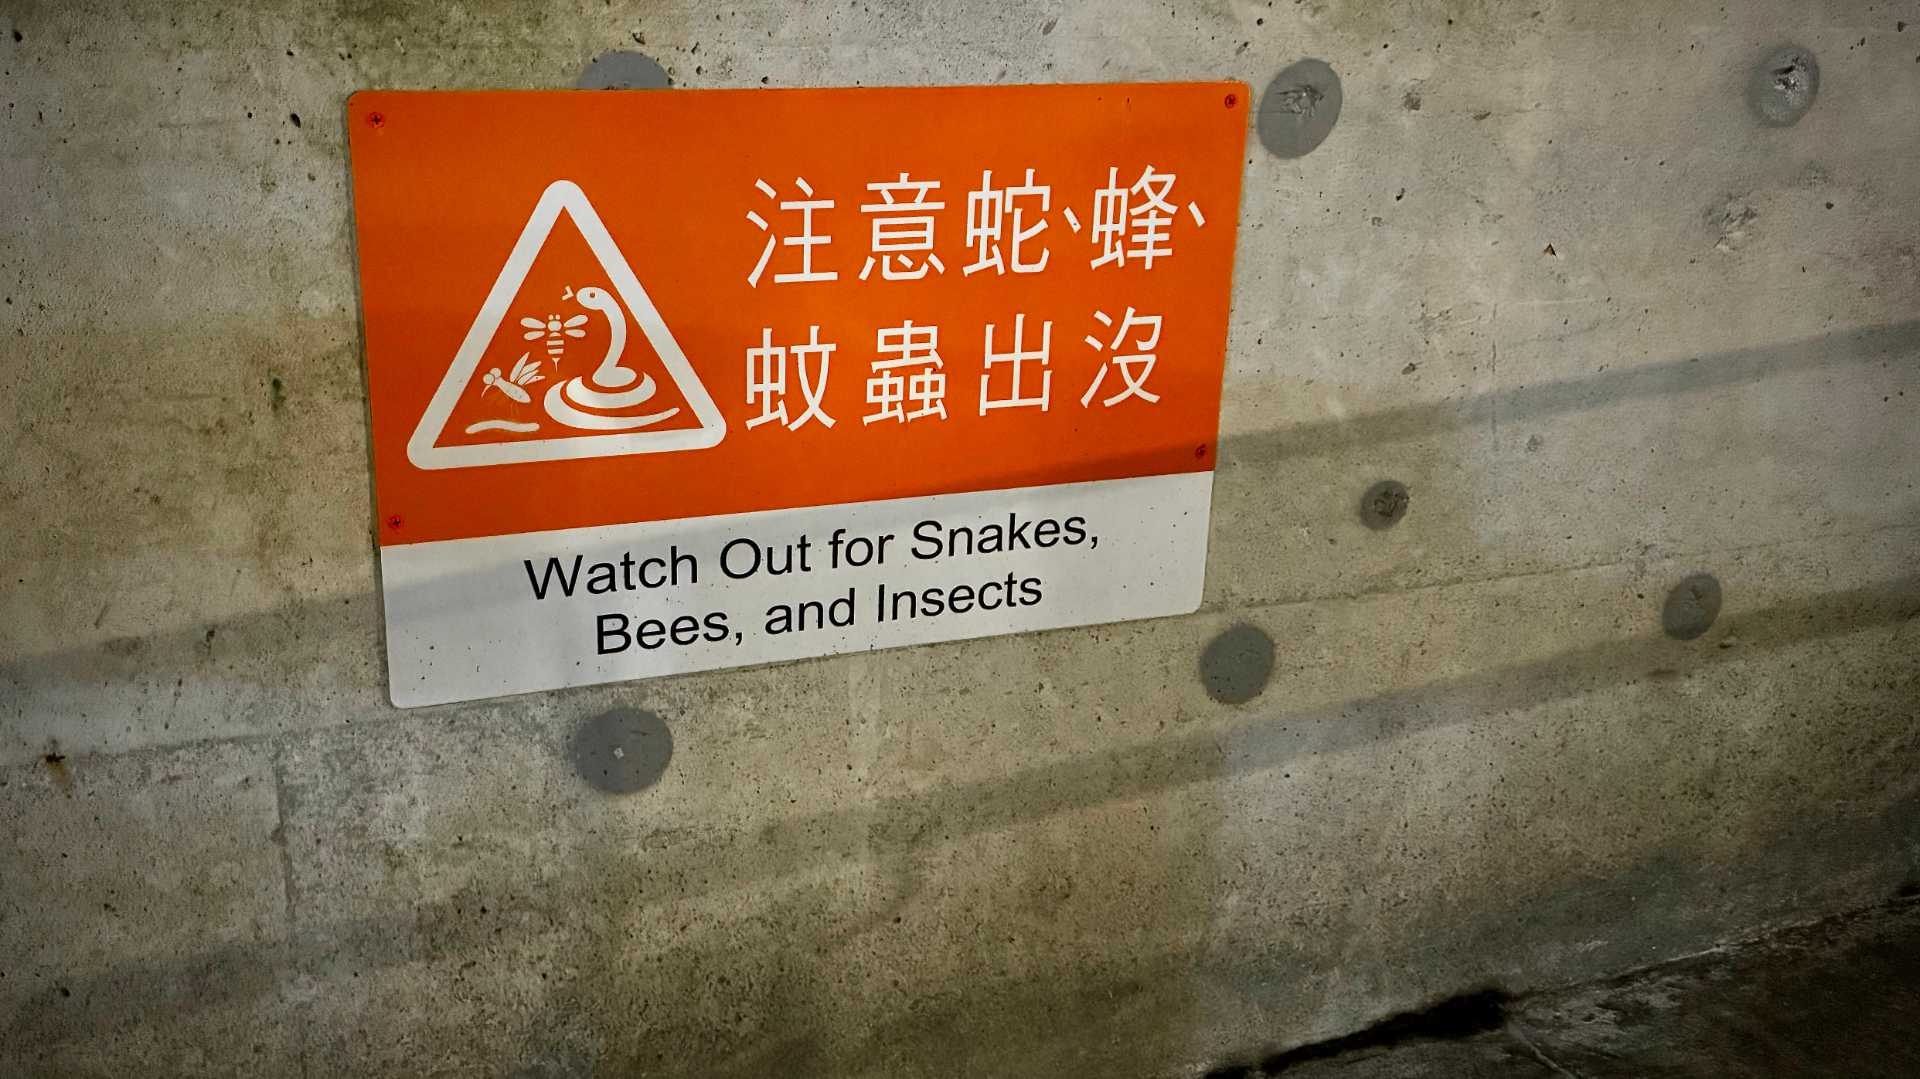 A sign that says ‘Watch Out for Snakes, Bees, and Insects’.